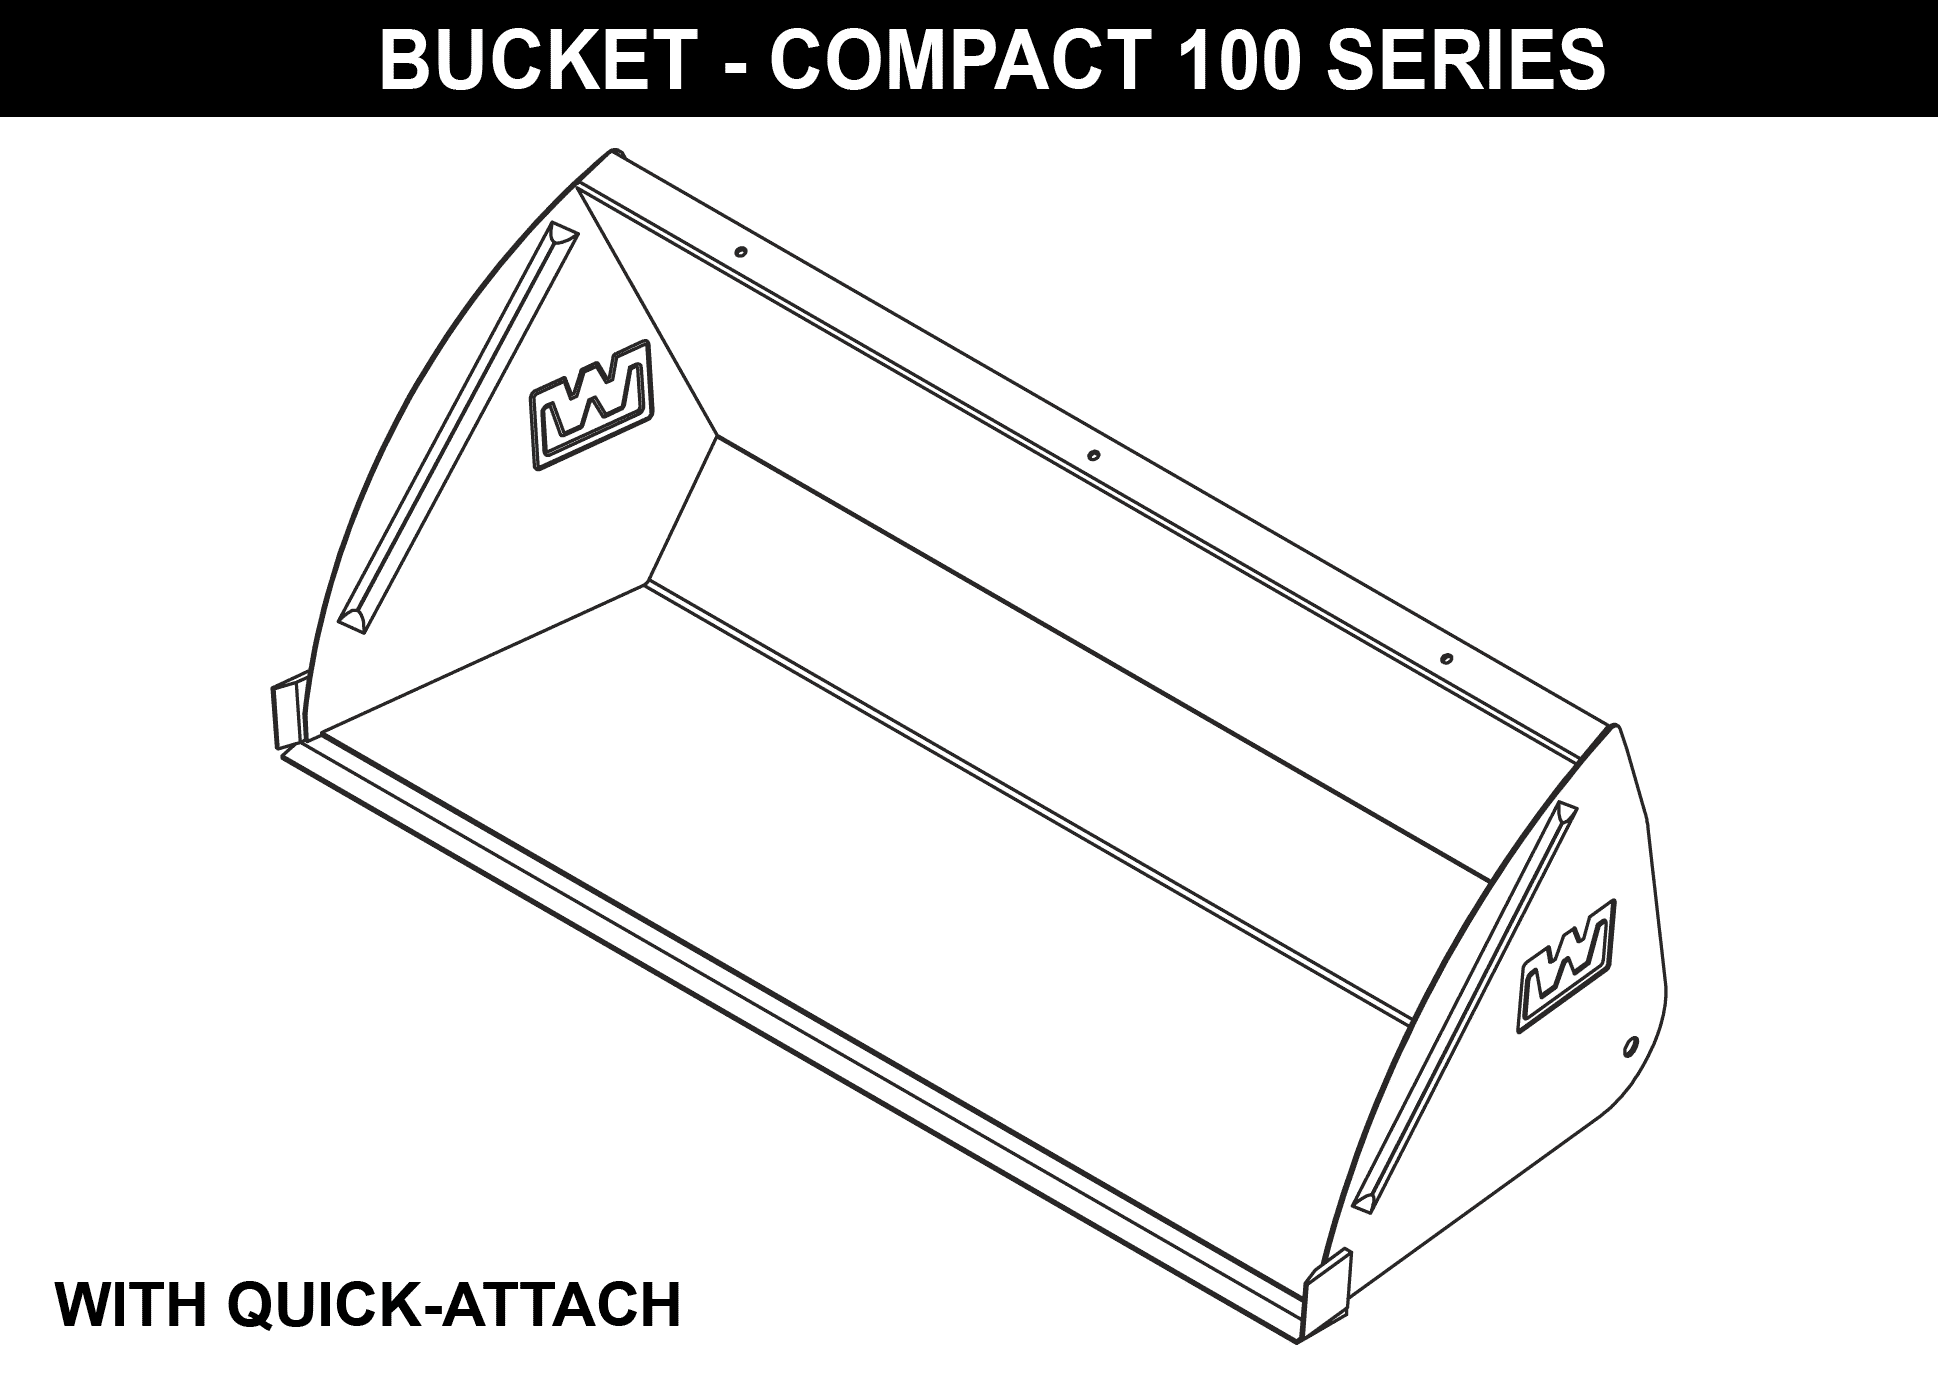 Bucket-Compact 100 Series with Quick Attach